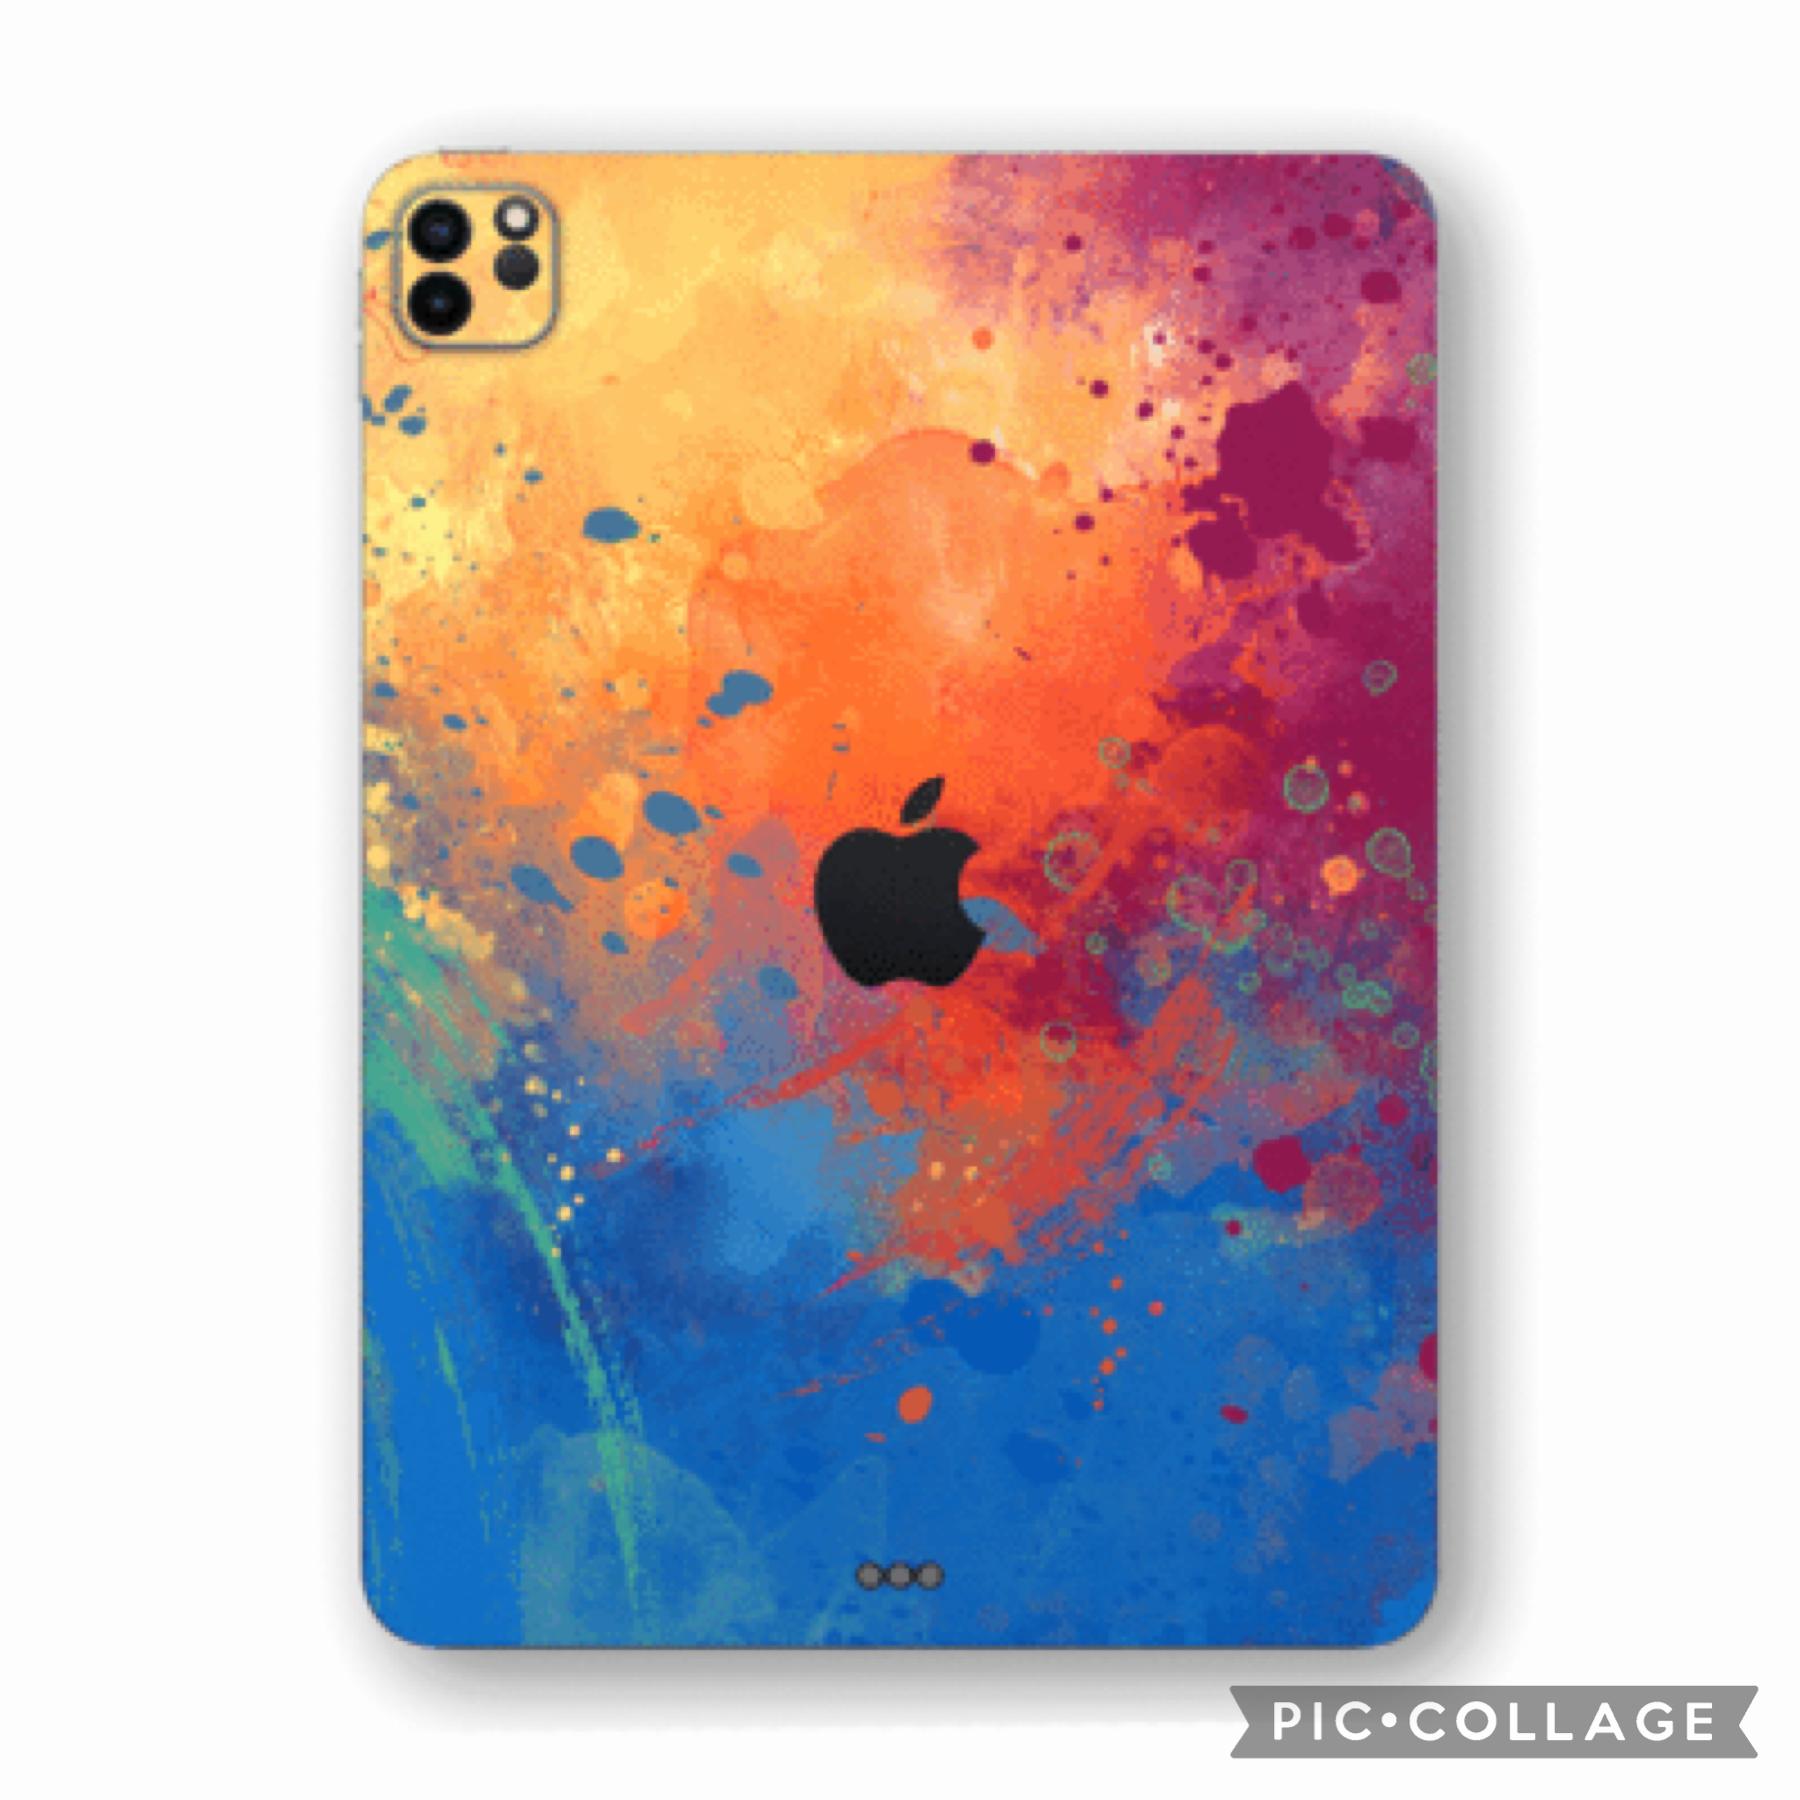 I customized this iPad! Please follow me, it would mean the world to me